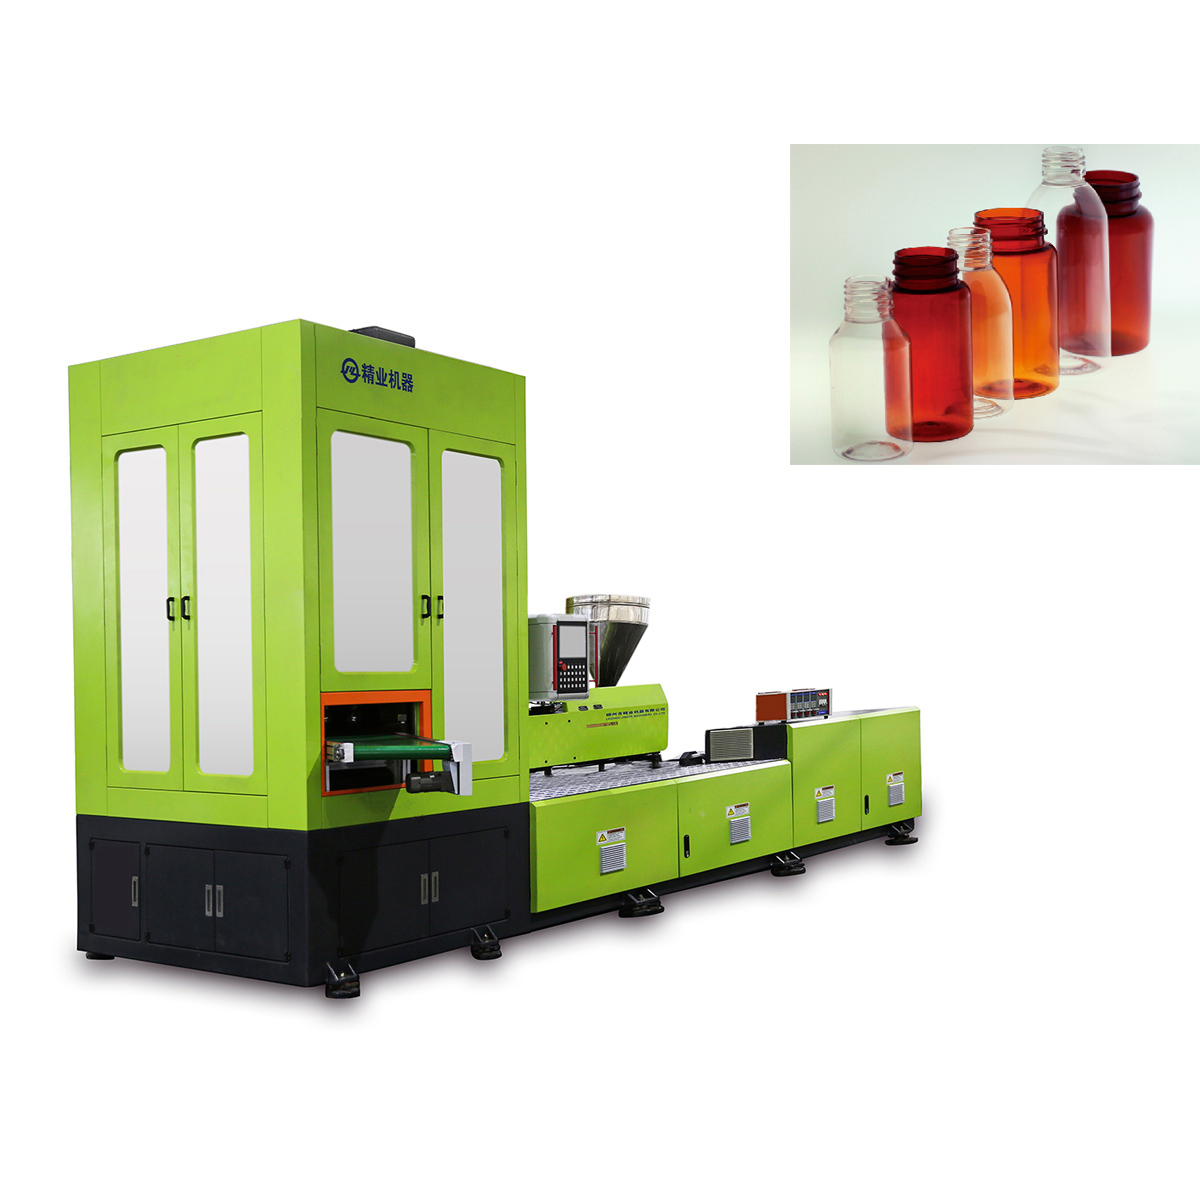 Single Stage Injection Stretch Blow Molding (ISBM) Machine For Making Pet Bottles Featured Image